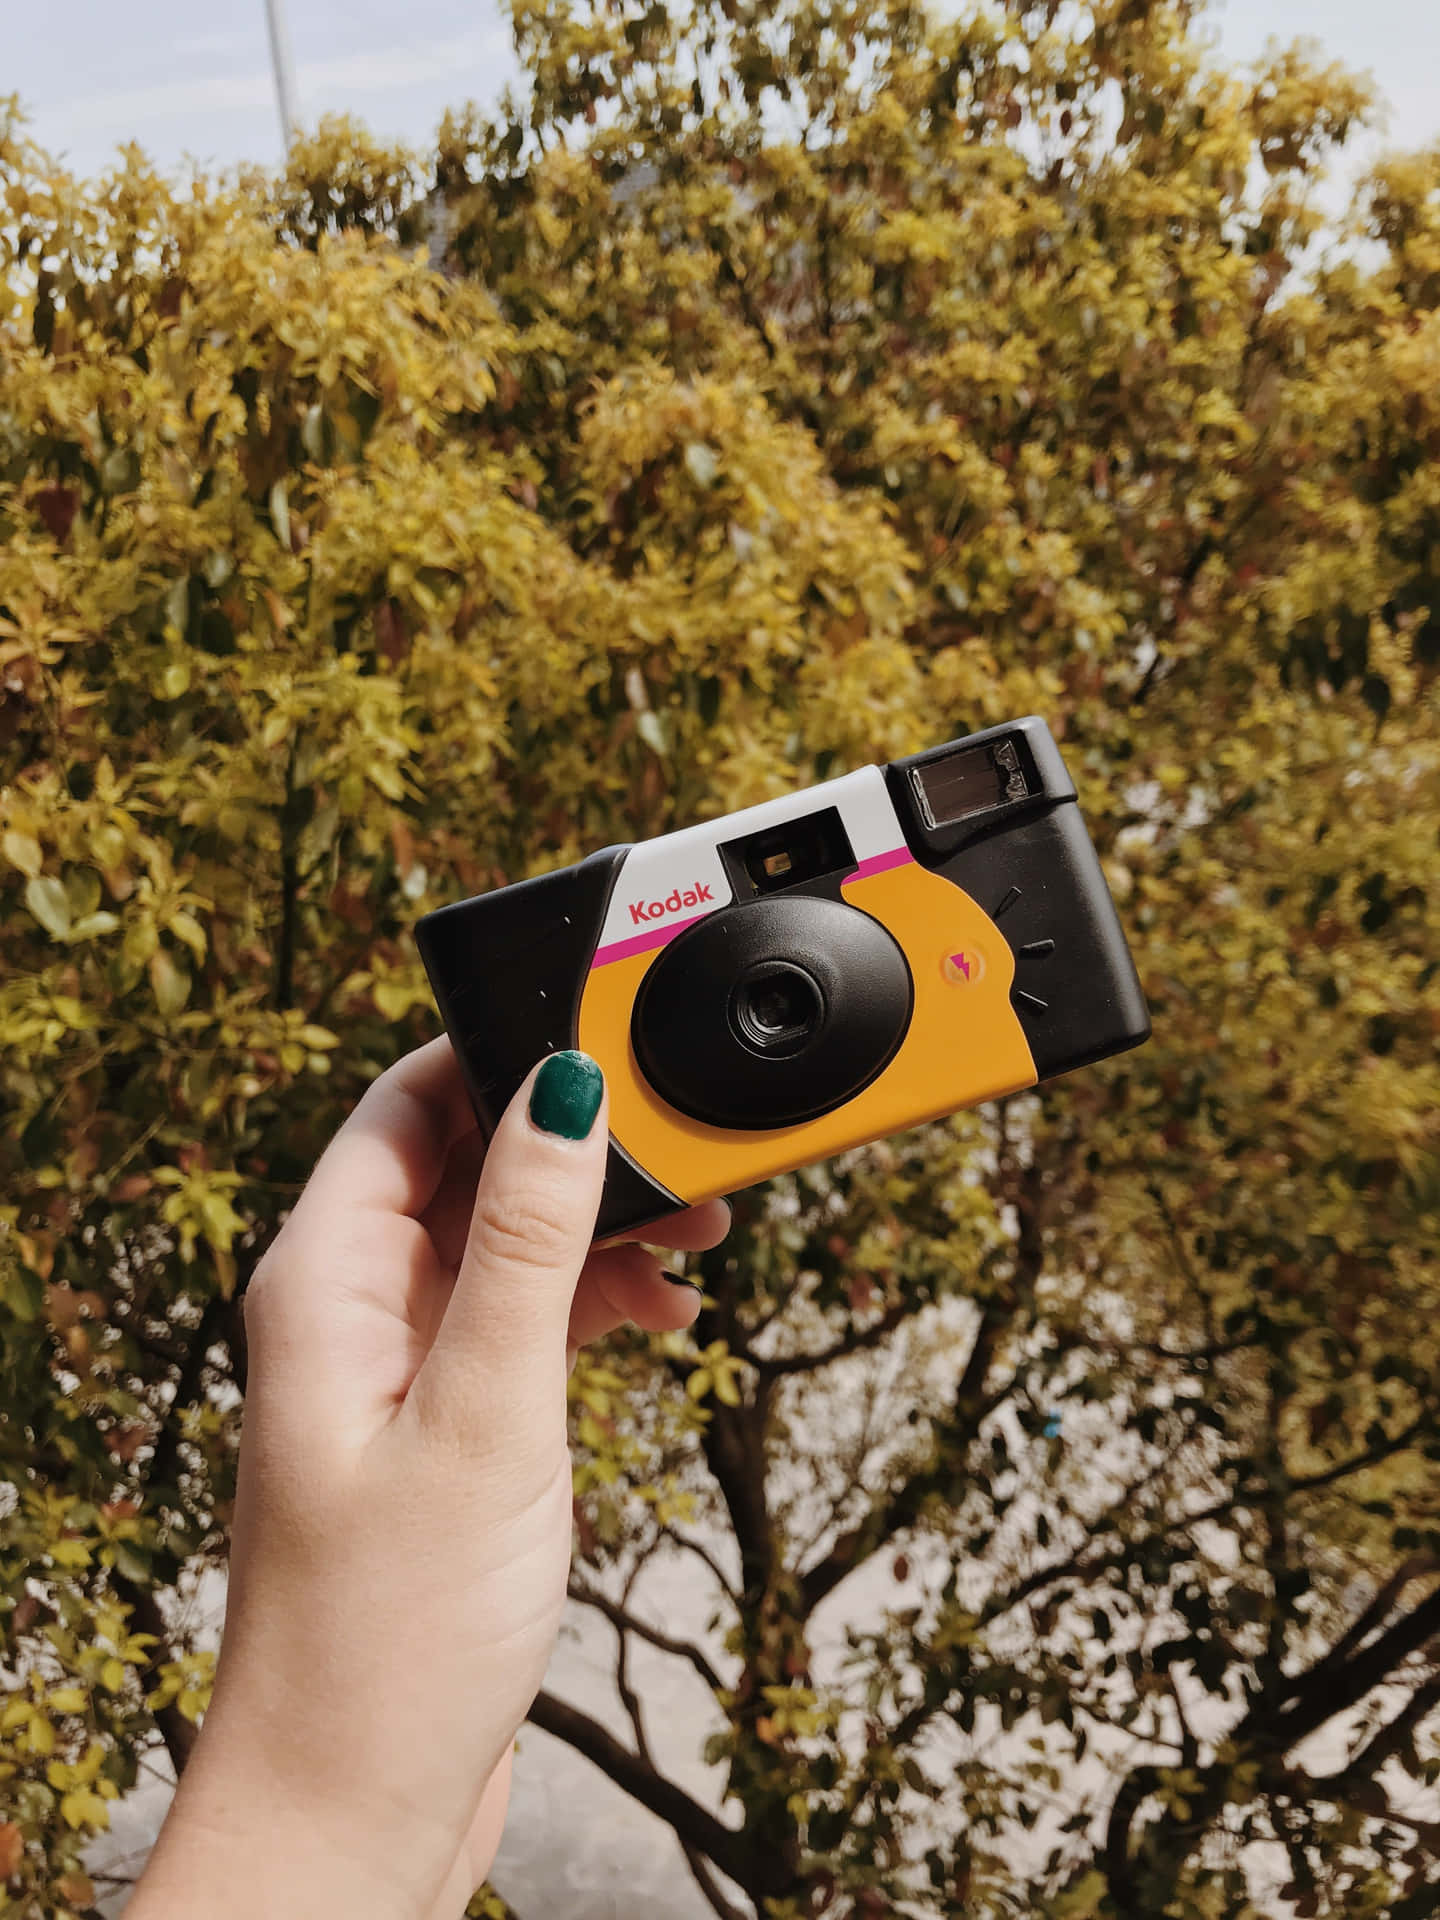 Capturing Moments On a Disposable Camera